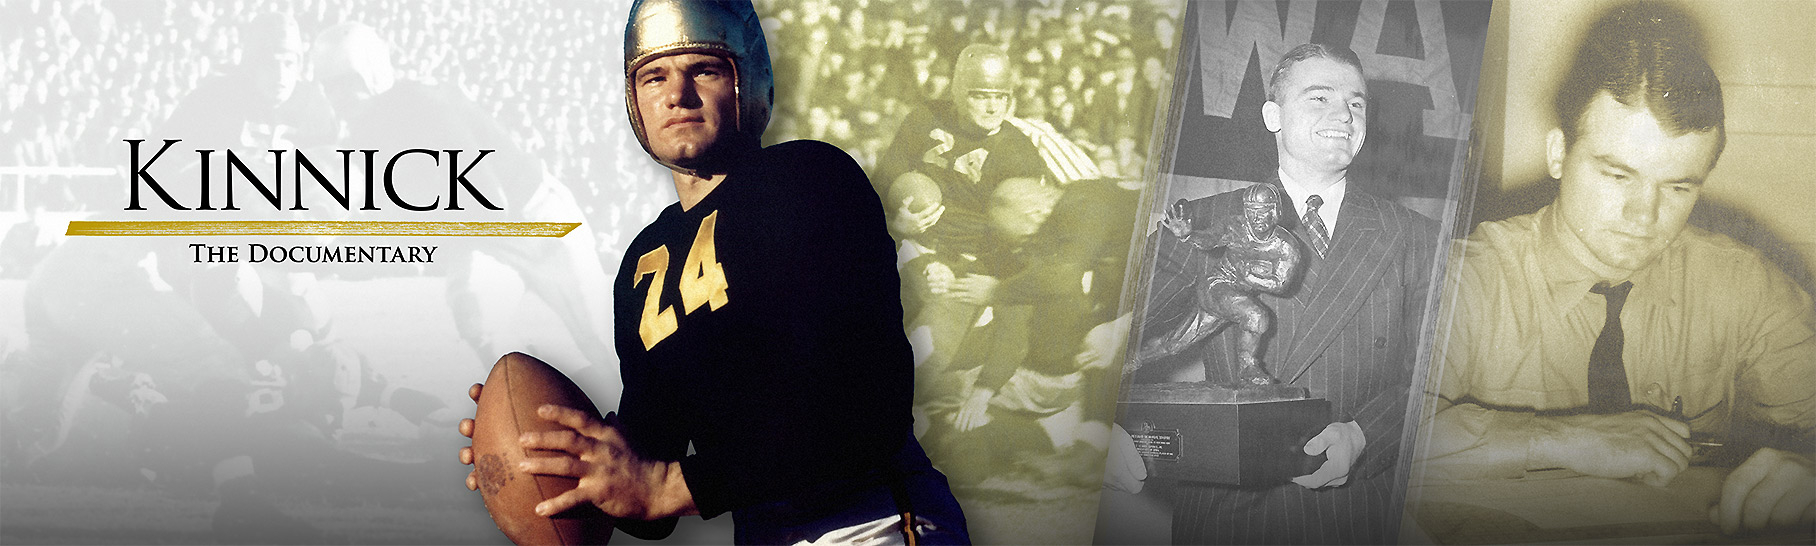 College football player Nile Kinnick prepares to throw a football wearing his number 24 black and gold uniform.